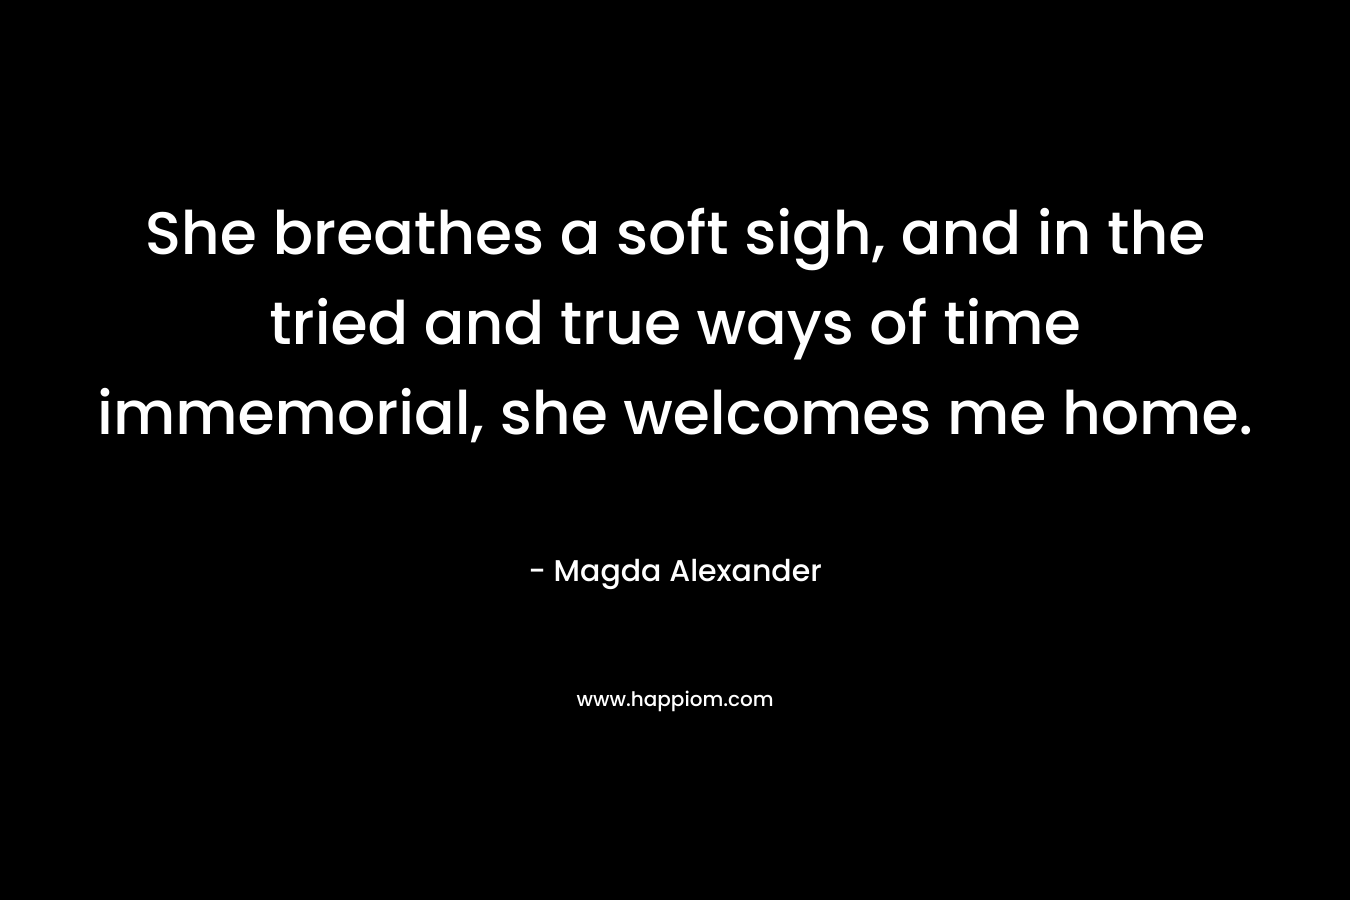 She breathes a soft sigh, and in the tried and true ways of time immemorial, she welcomes me home. – Magda Alexander